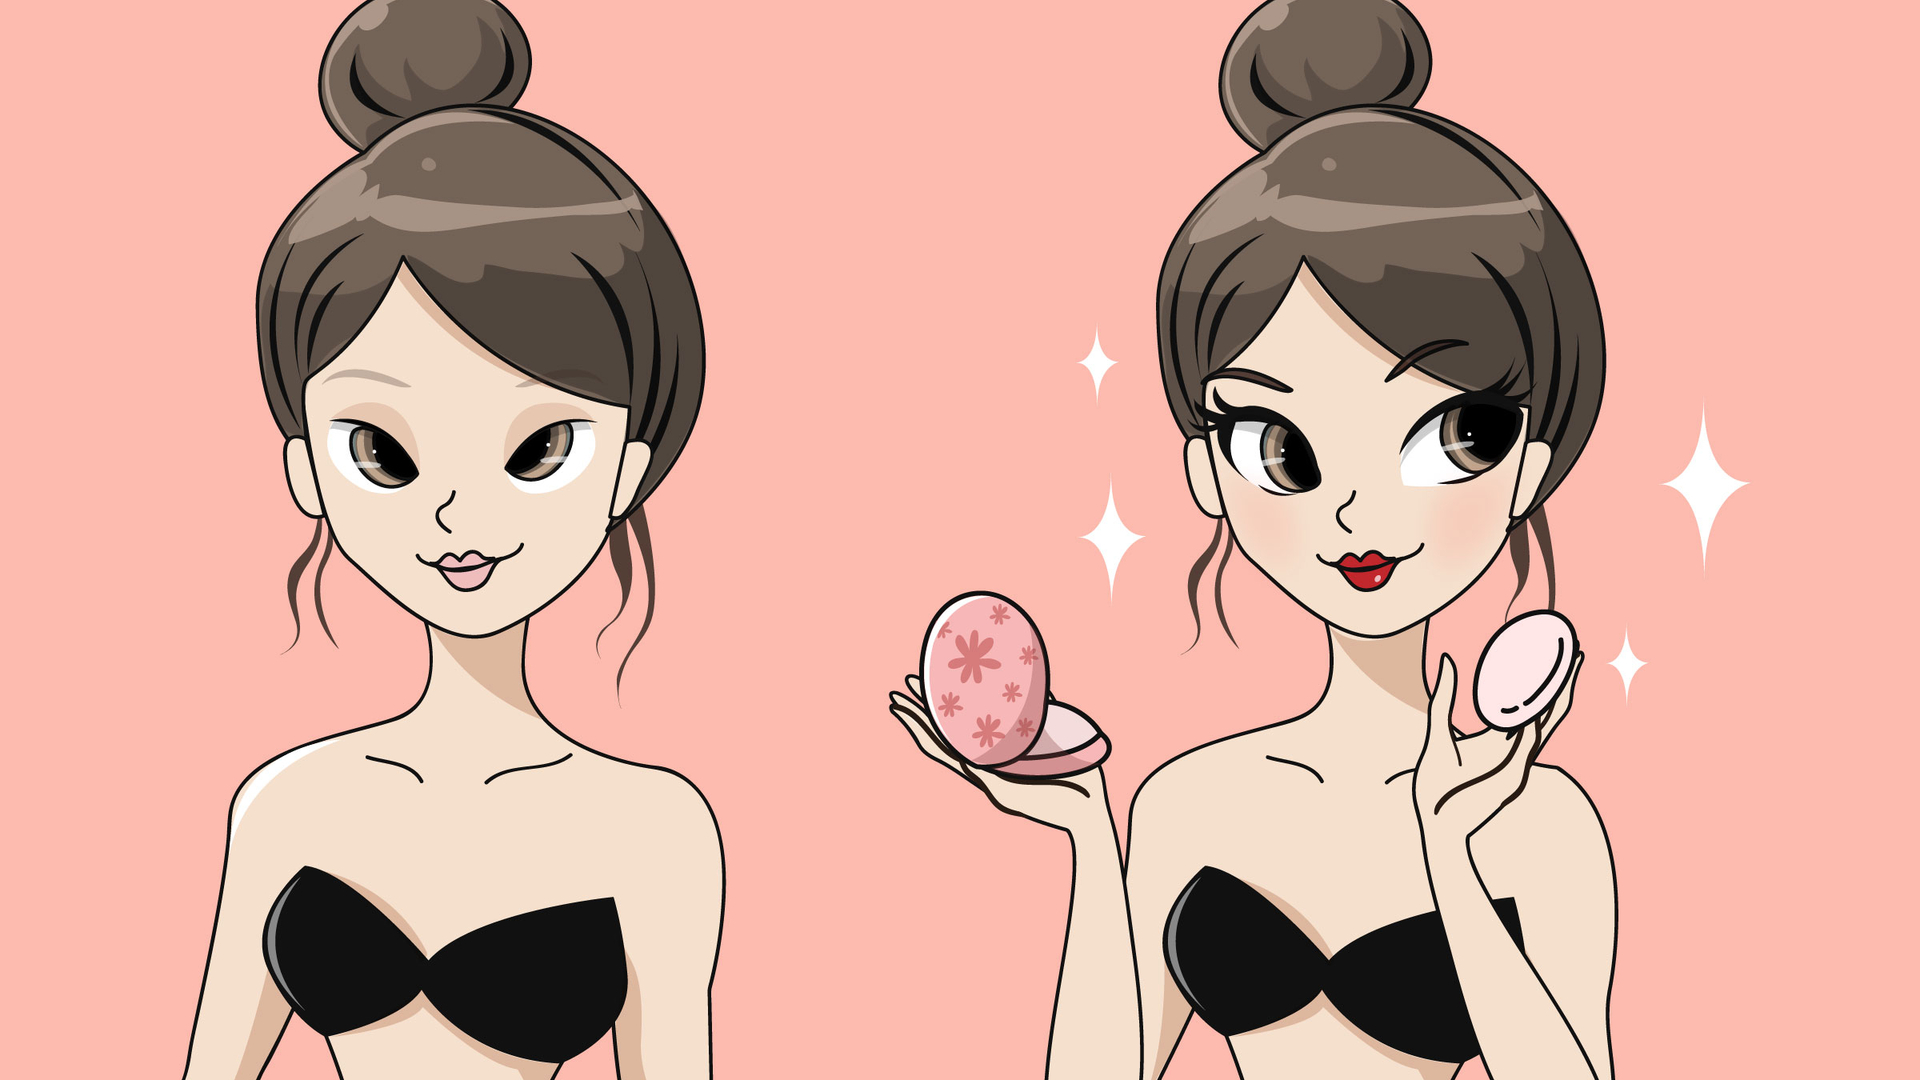 Brunette woman with her hair up in a bun wearing a black bra before and after she applies her makeup.